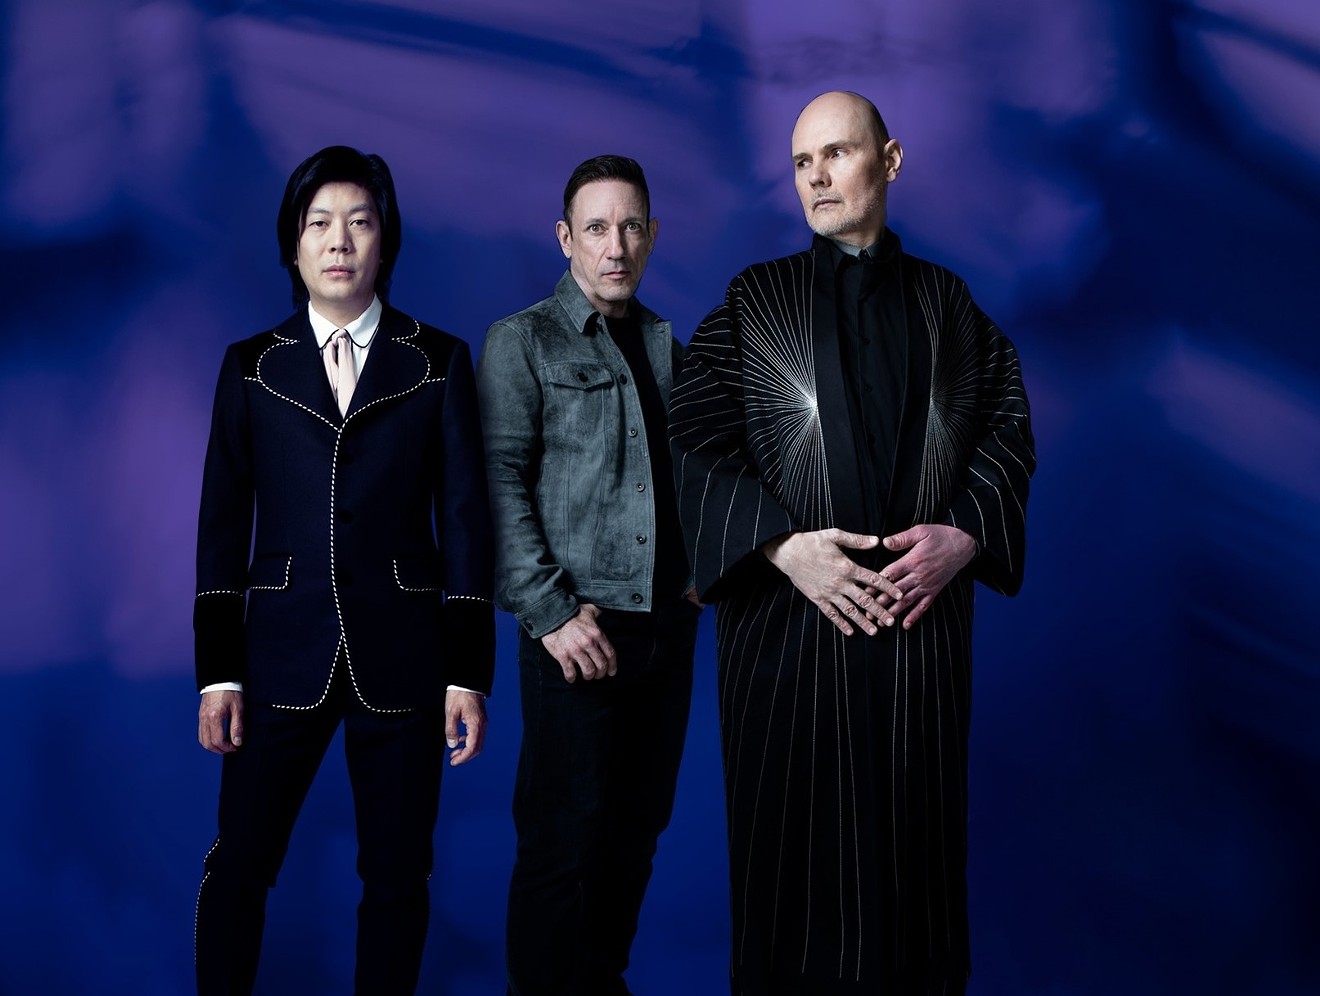 Want to join Smashing Pumpkins? Here's how.